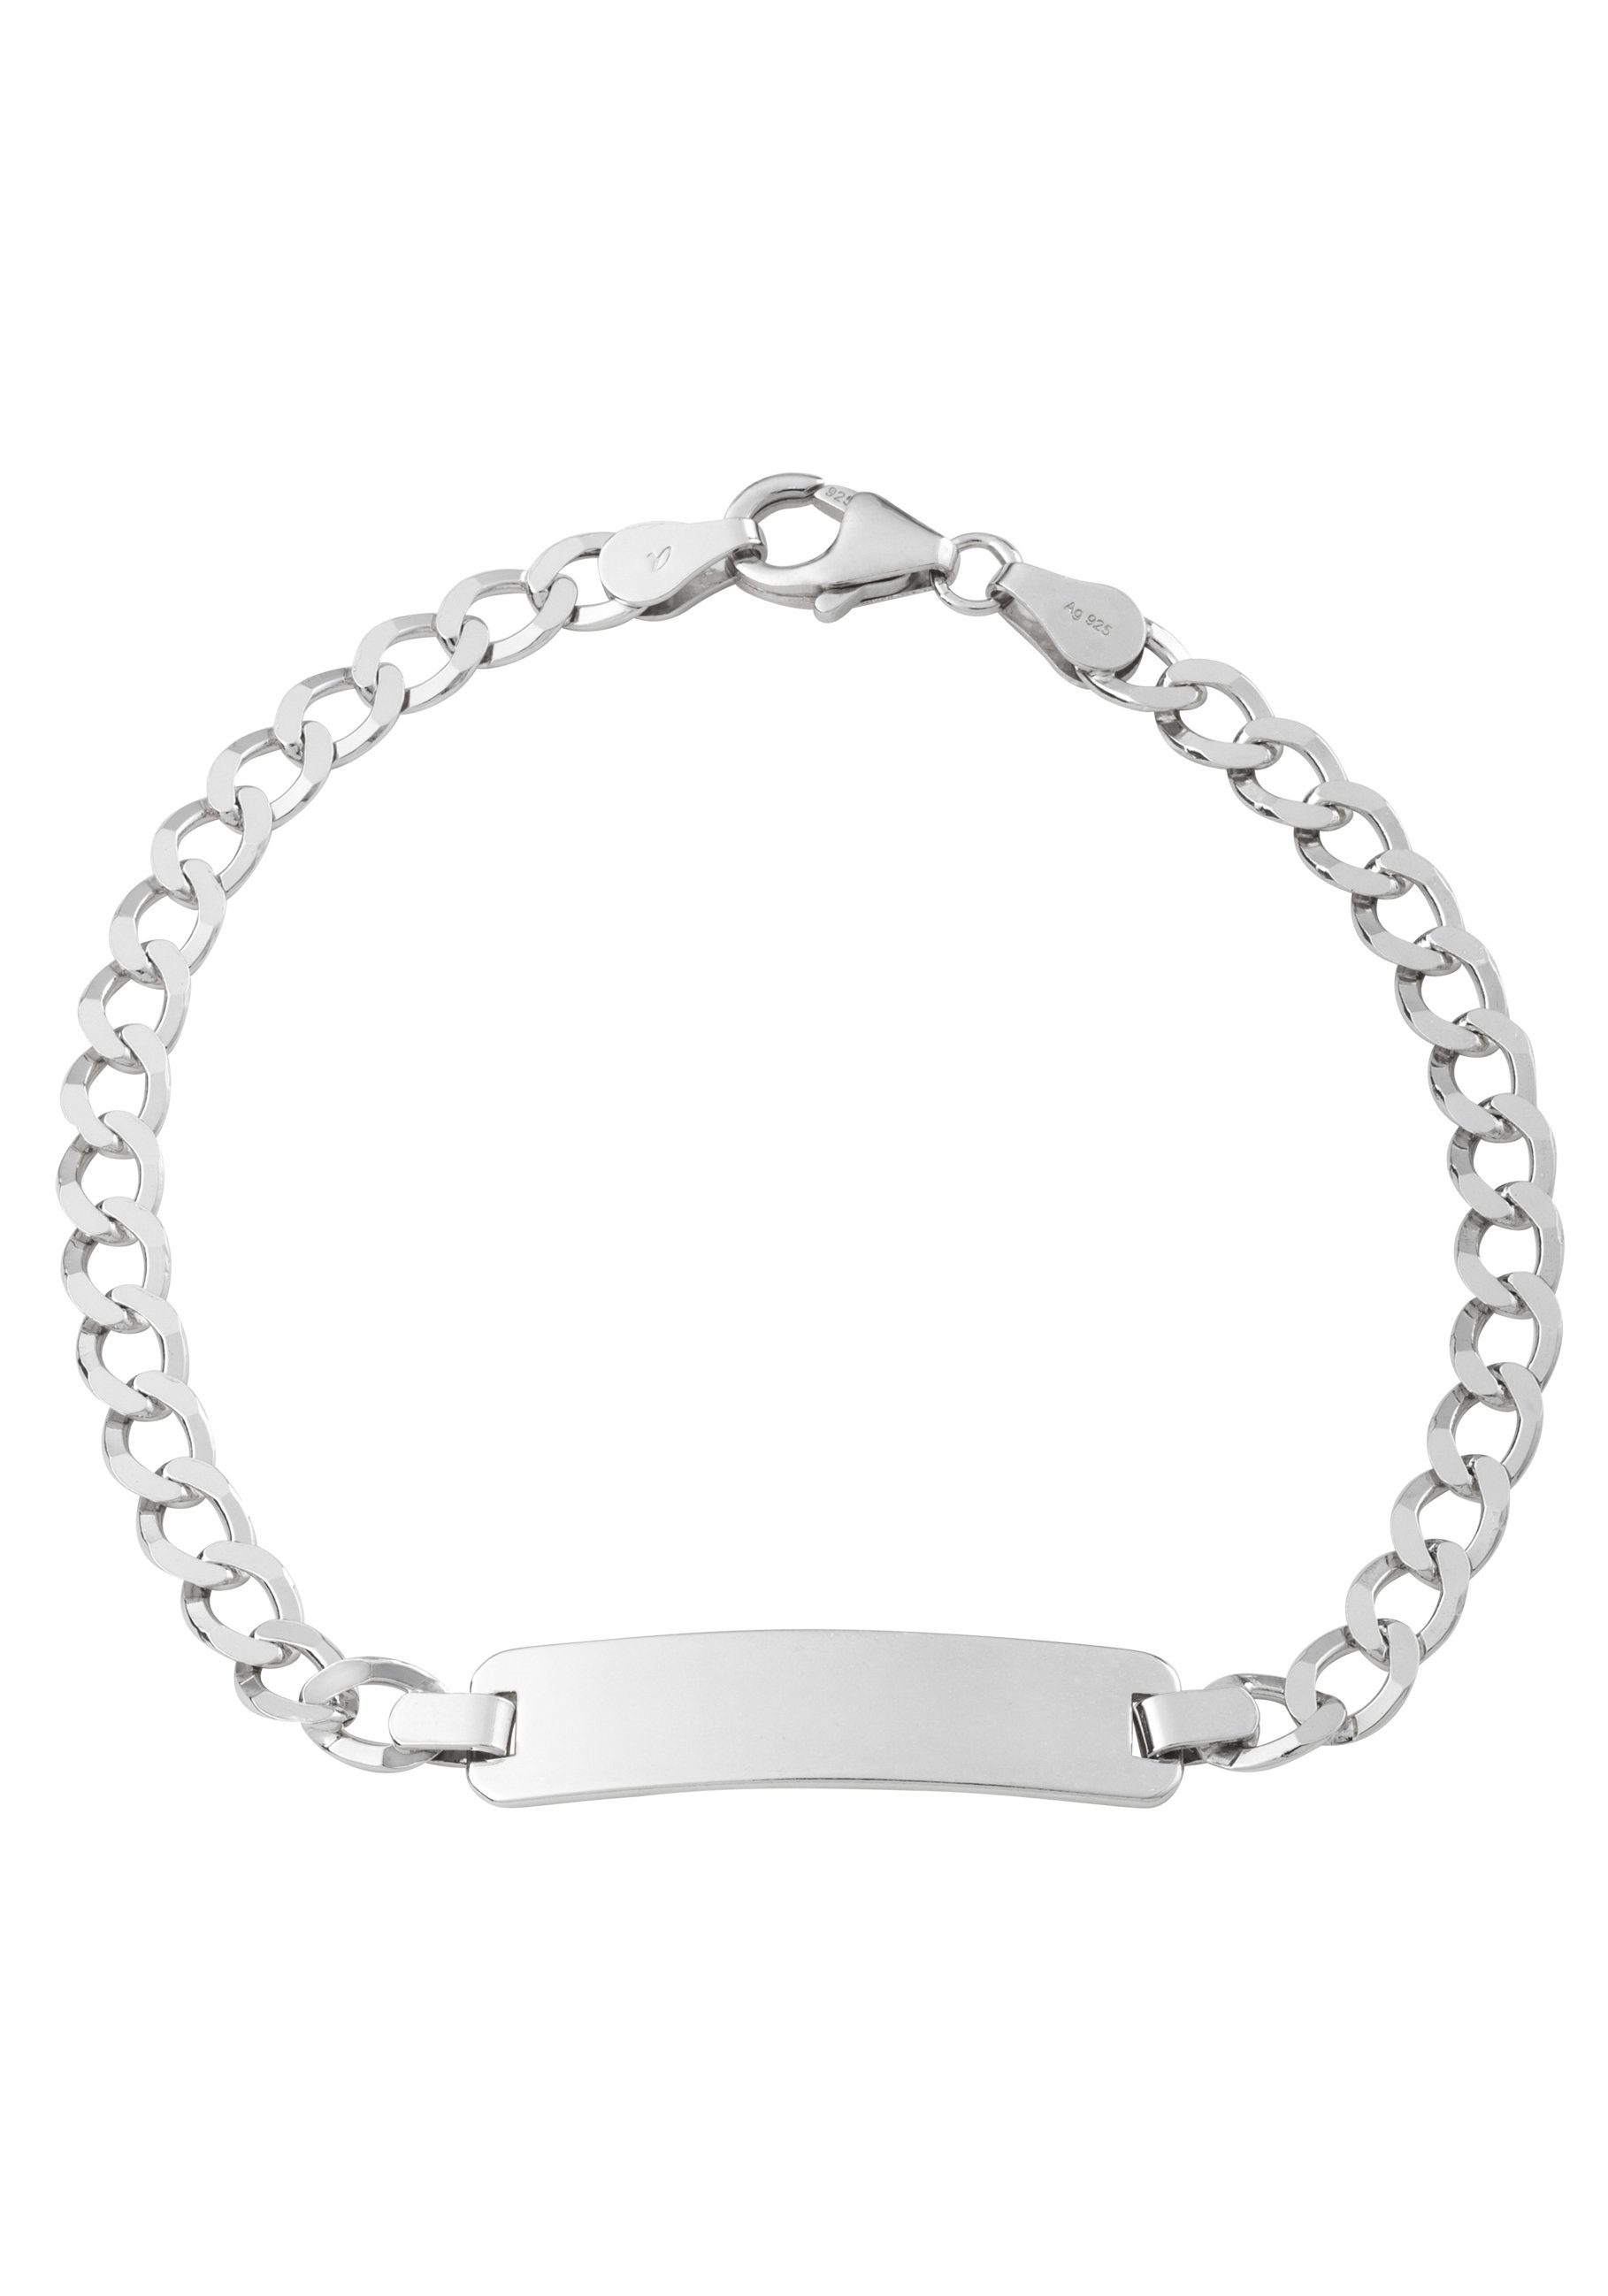 Amor Silberarmband 9240470, Made in Germany